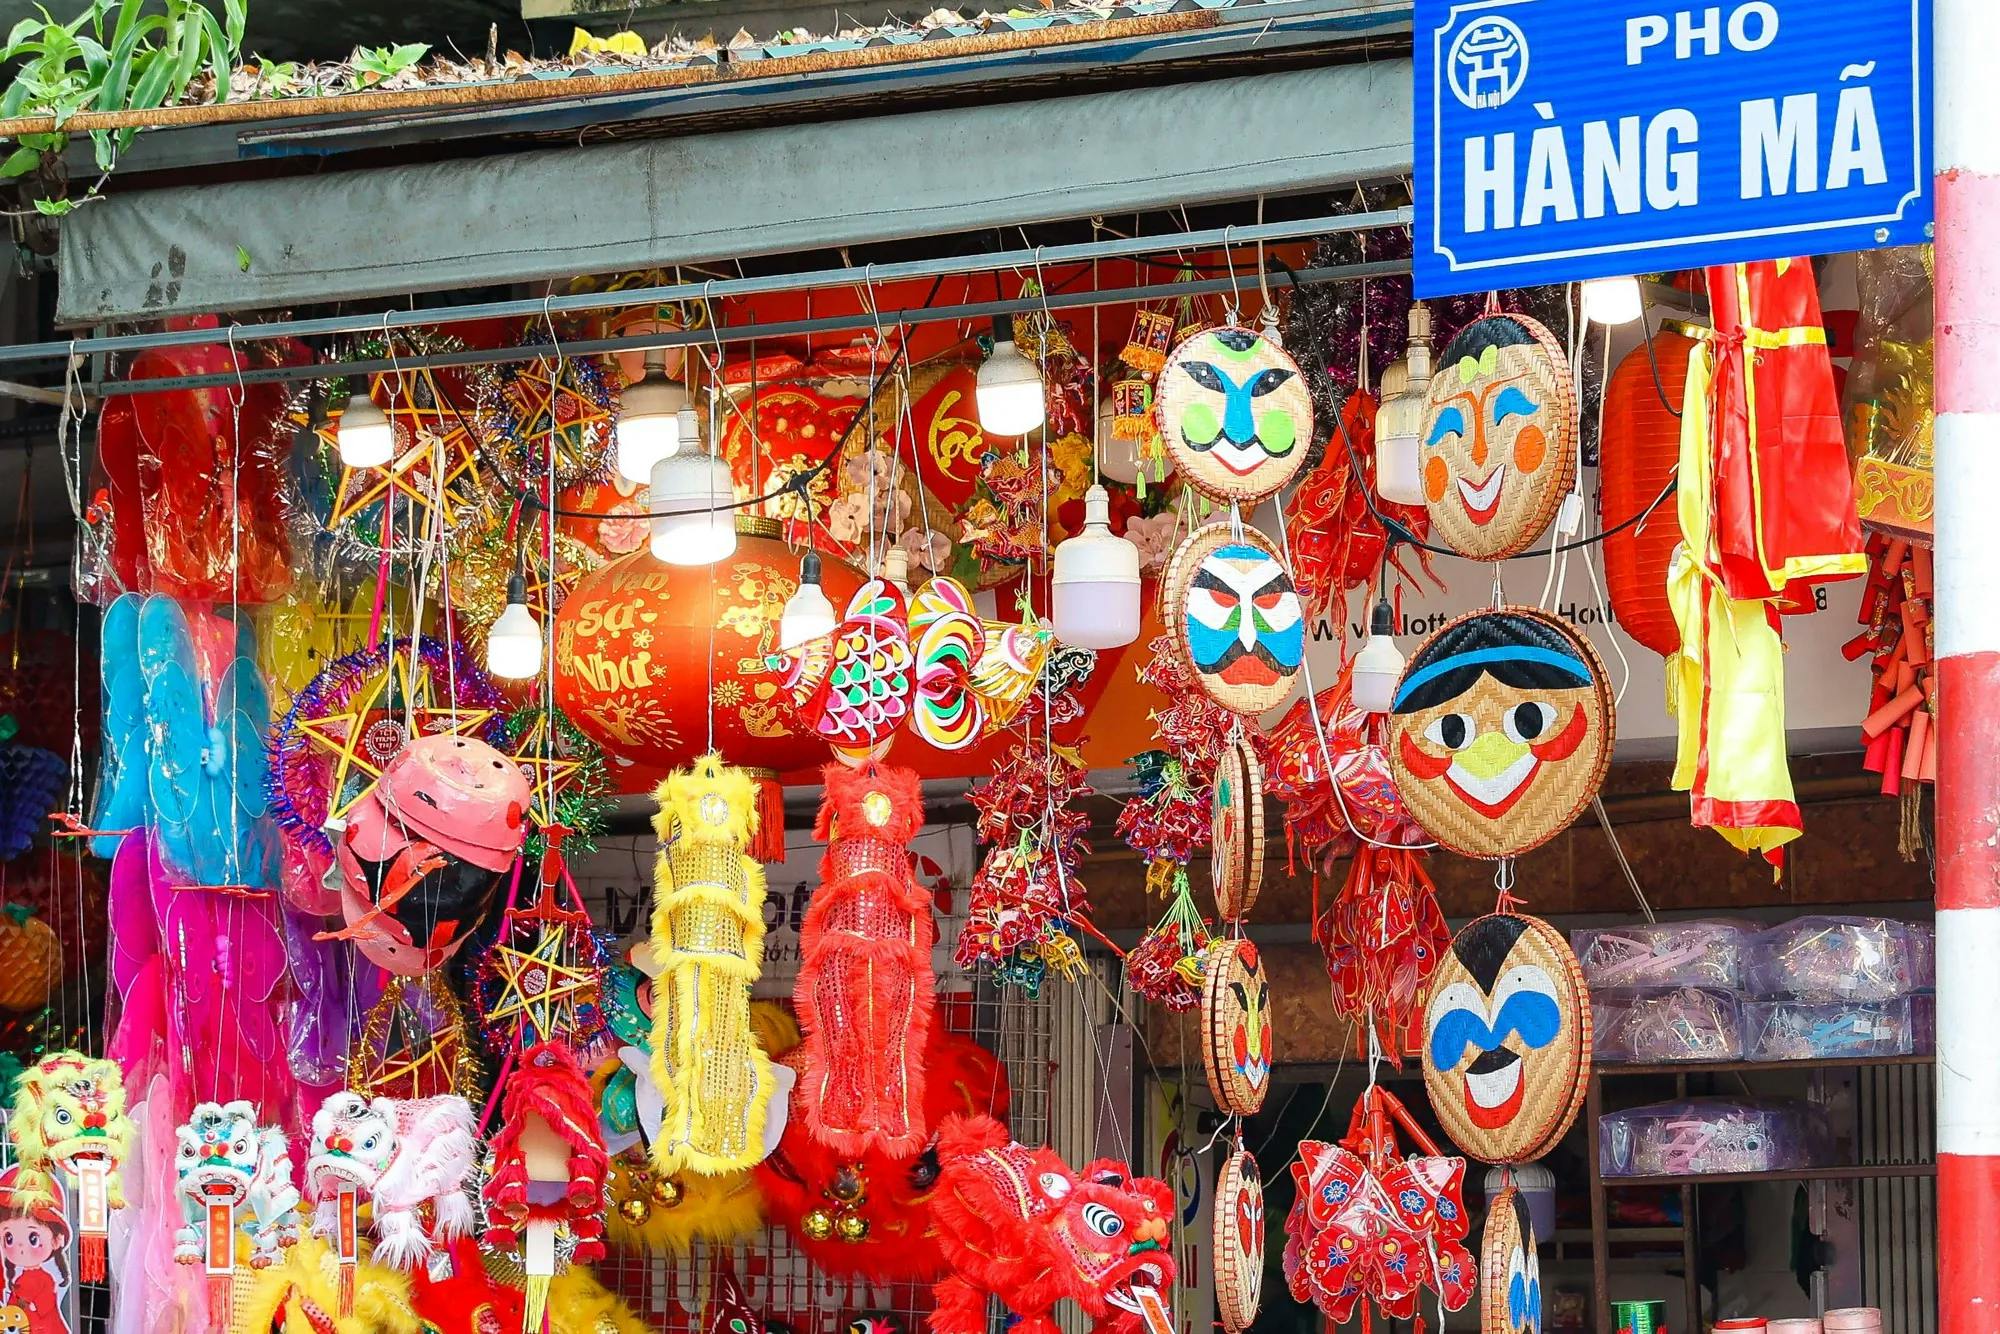 Hang Ma’s colorful decoration shops